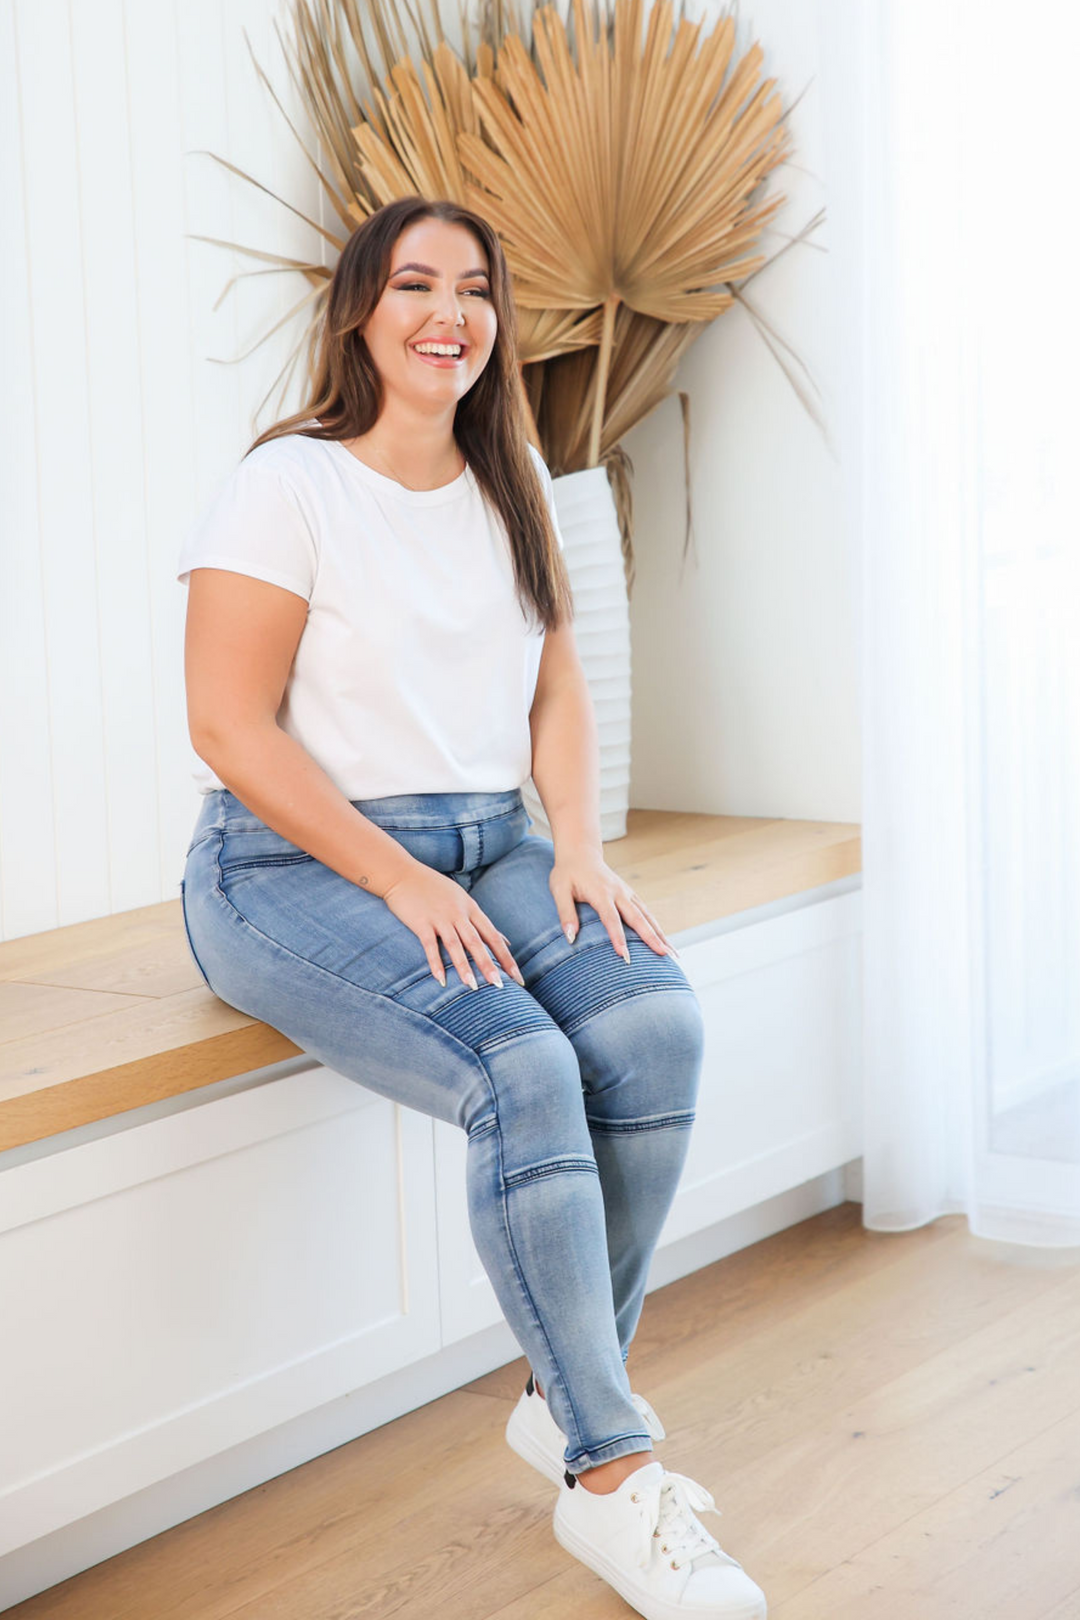 Ladies Light Denim Jeans - Tummy Flattening Waist Band - Panel Jeans - Pull On Jeans - Functional Back Pockets - Sizes 6 - 18 - Delilah Jeans Front Sitting View - Daisy's Closet